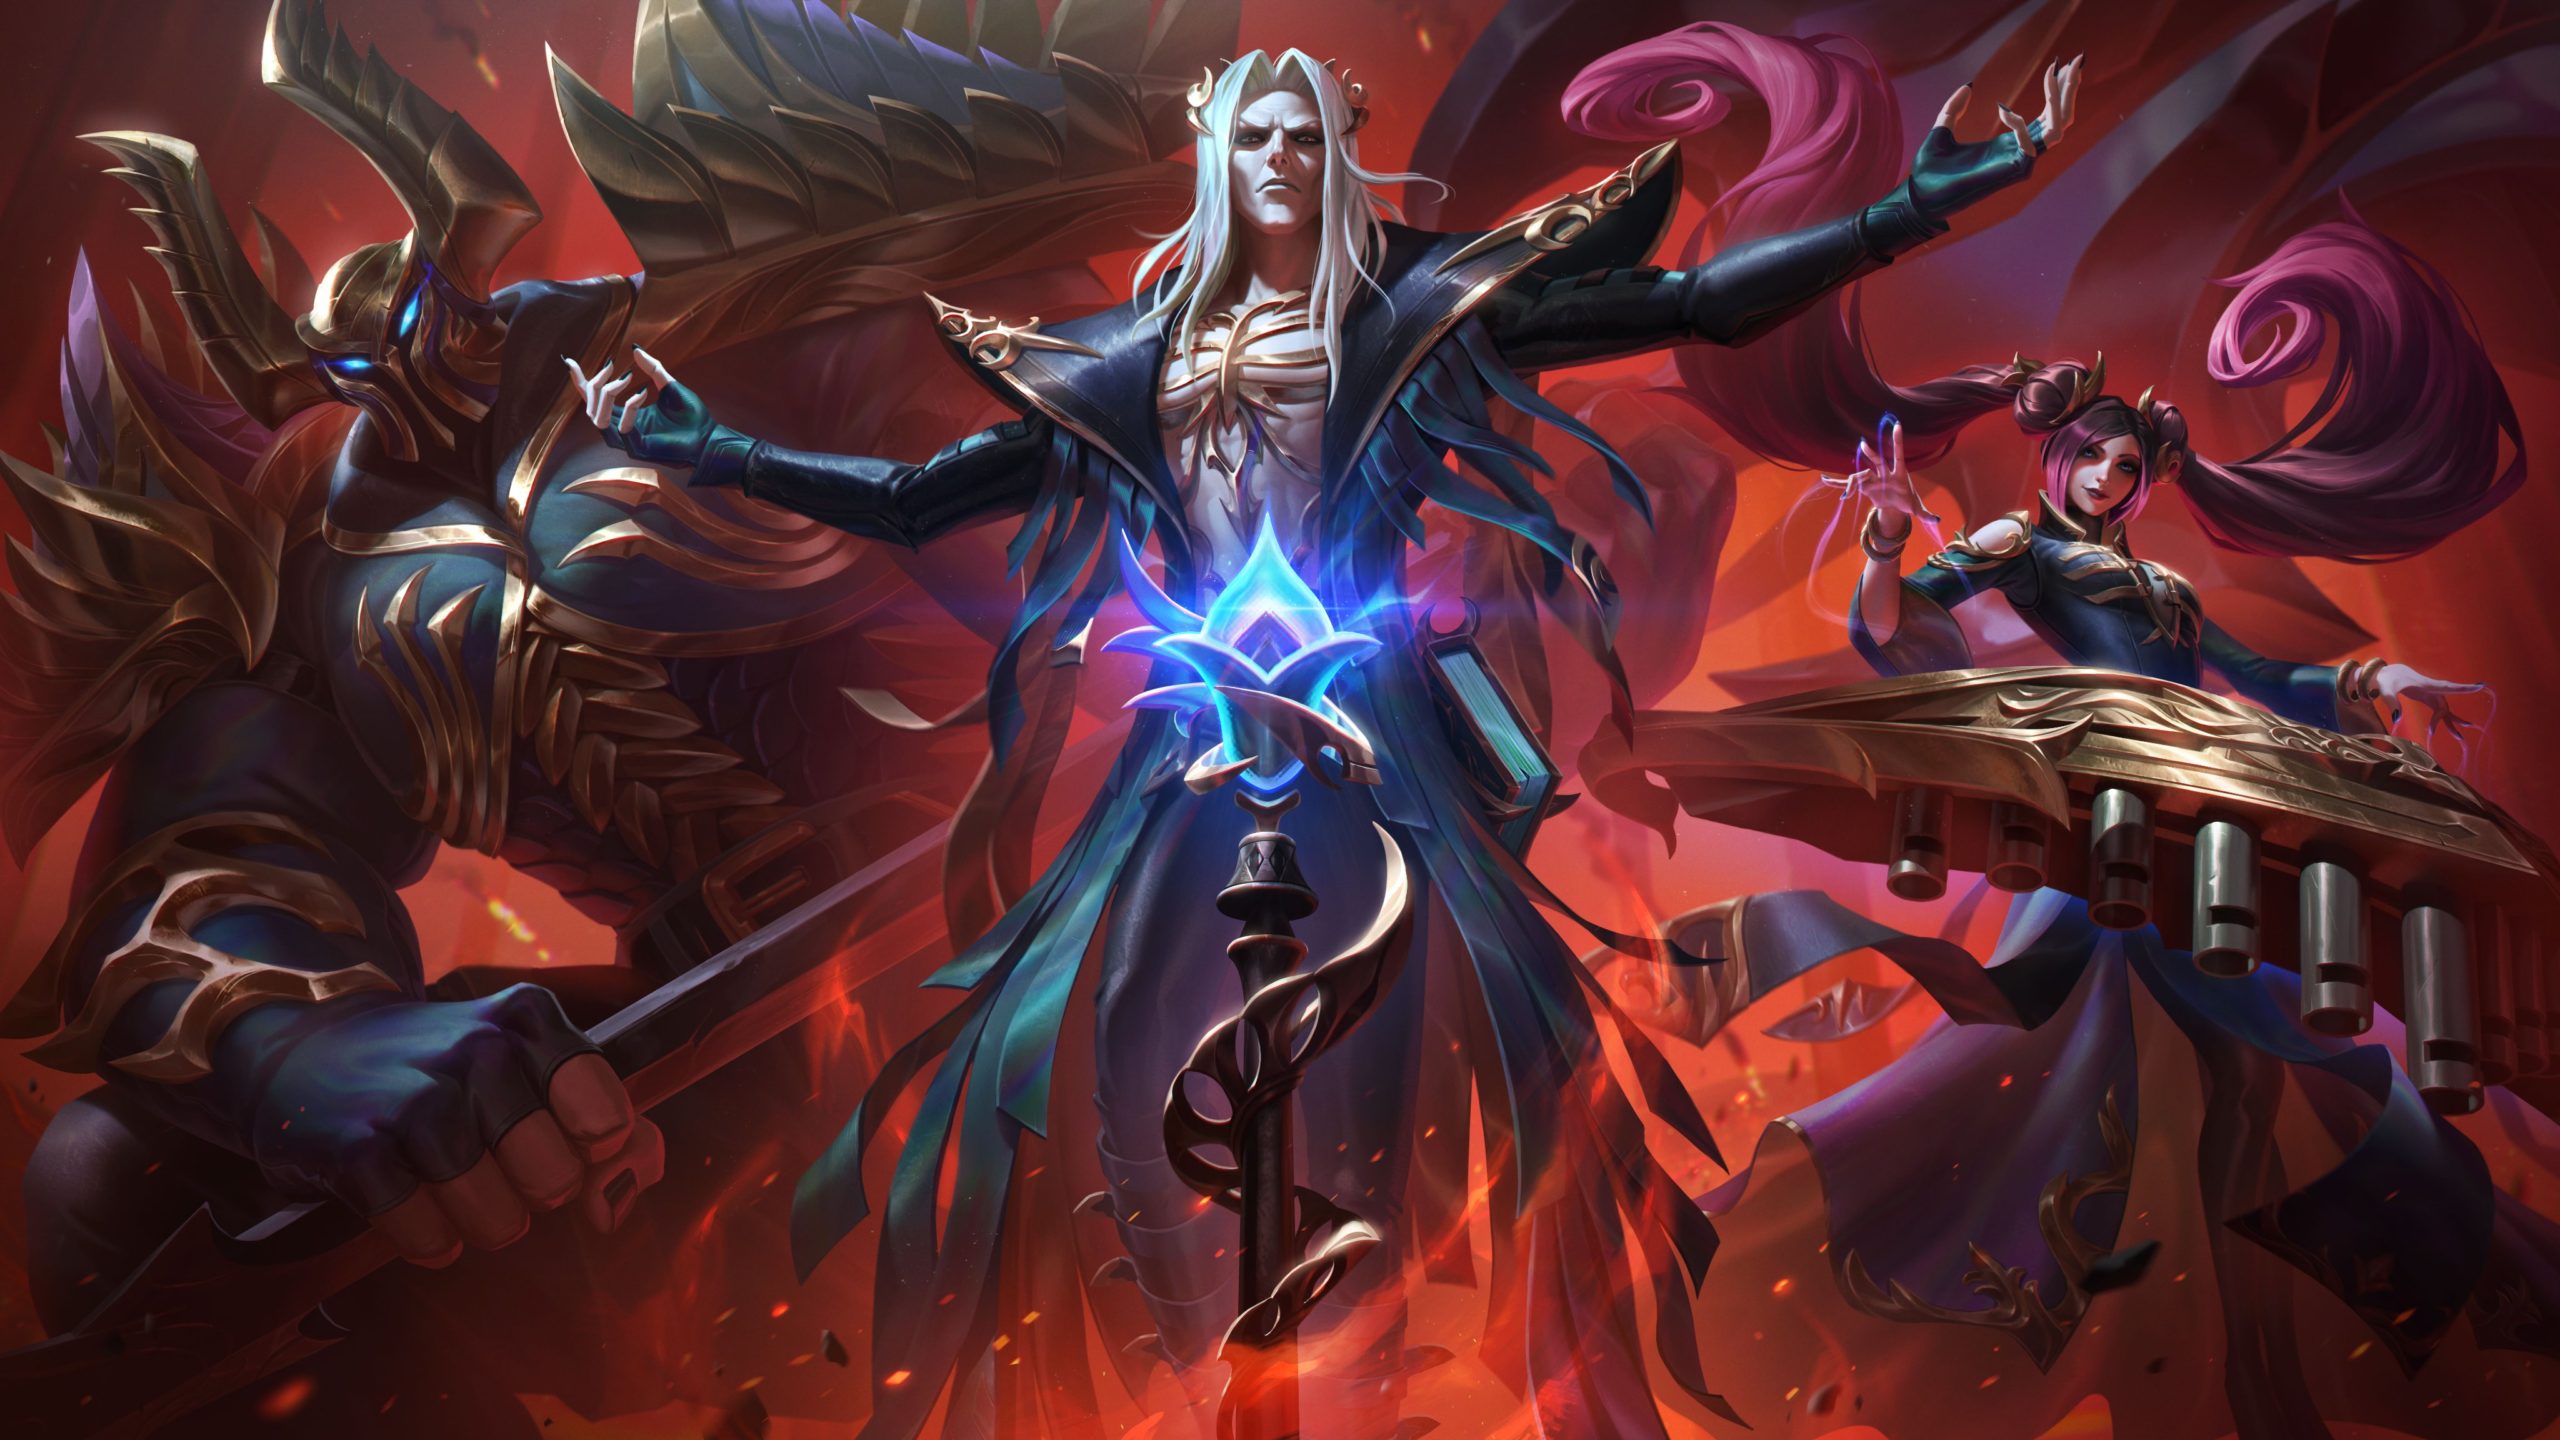 Here are the splash arts for every new Pentakill skin coming to League